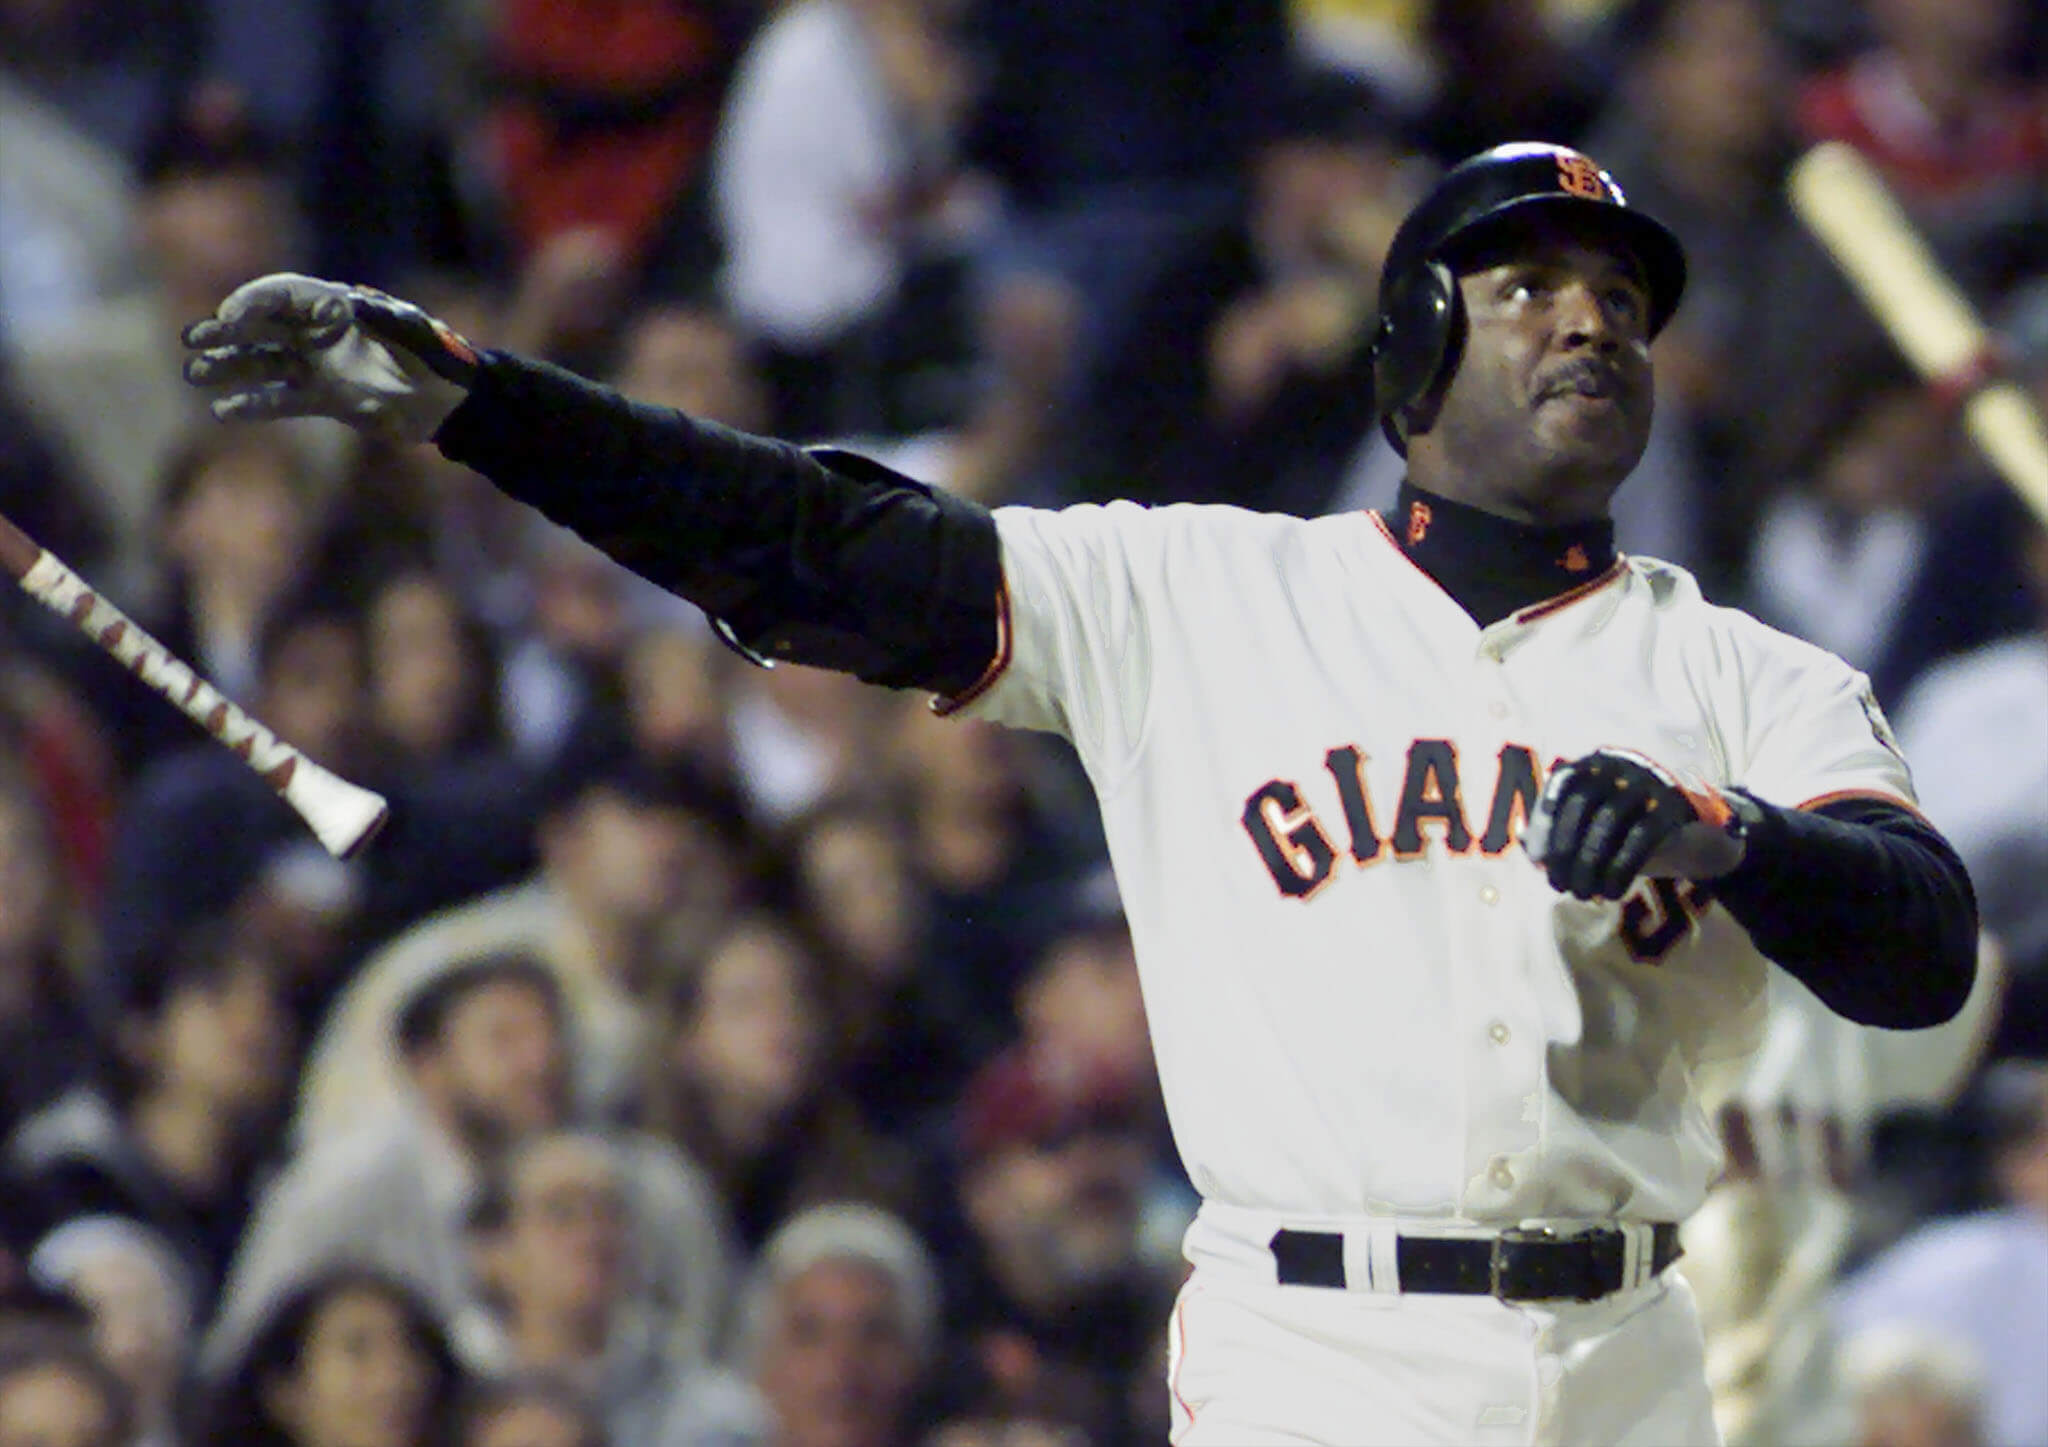 Barry Bonds, Roger Clemens Hall of Fame snub the latest example of